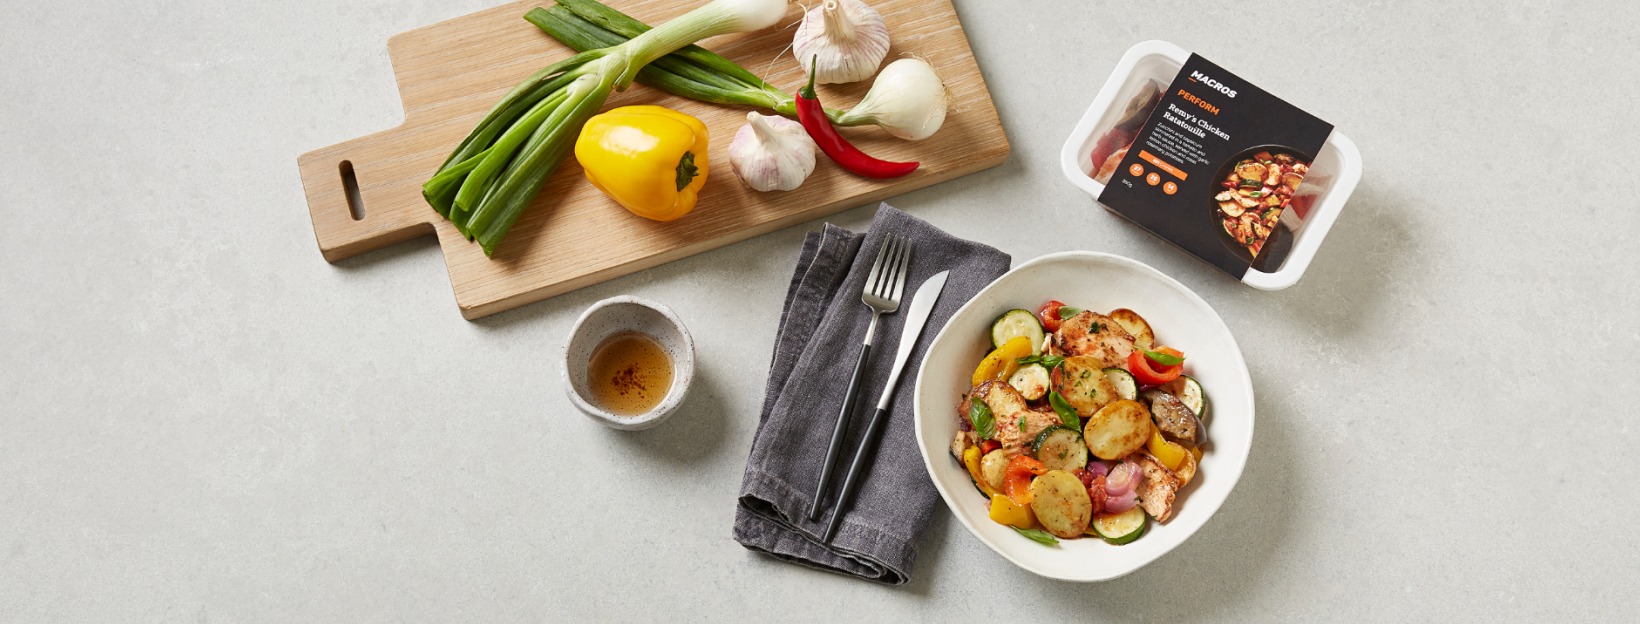 Shh, $20 OFF on your meal plan with Macros coupon code[New customers]